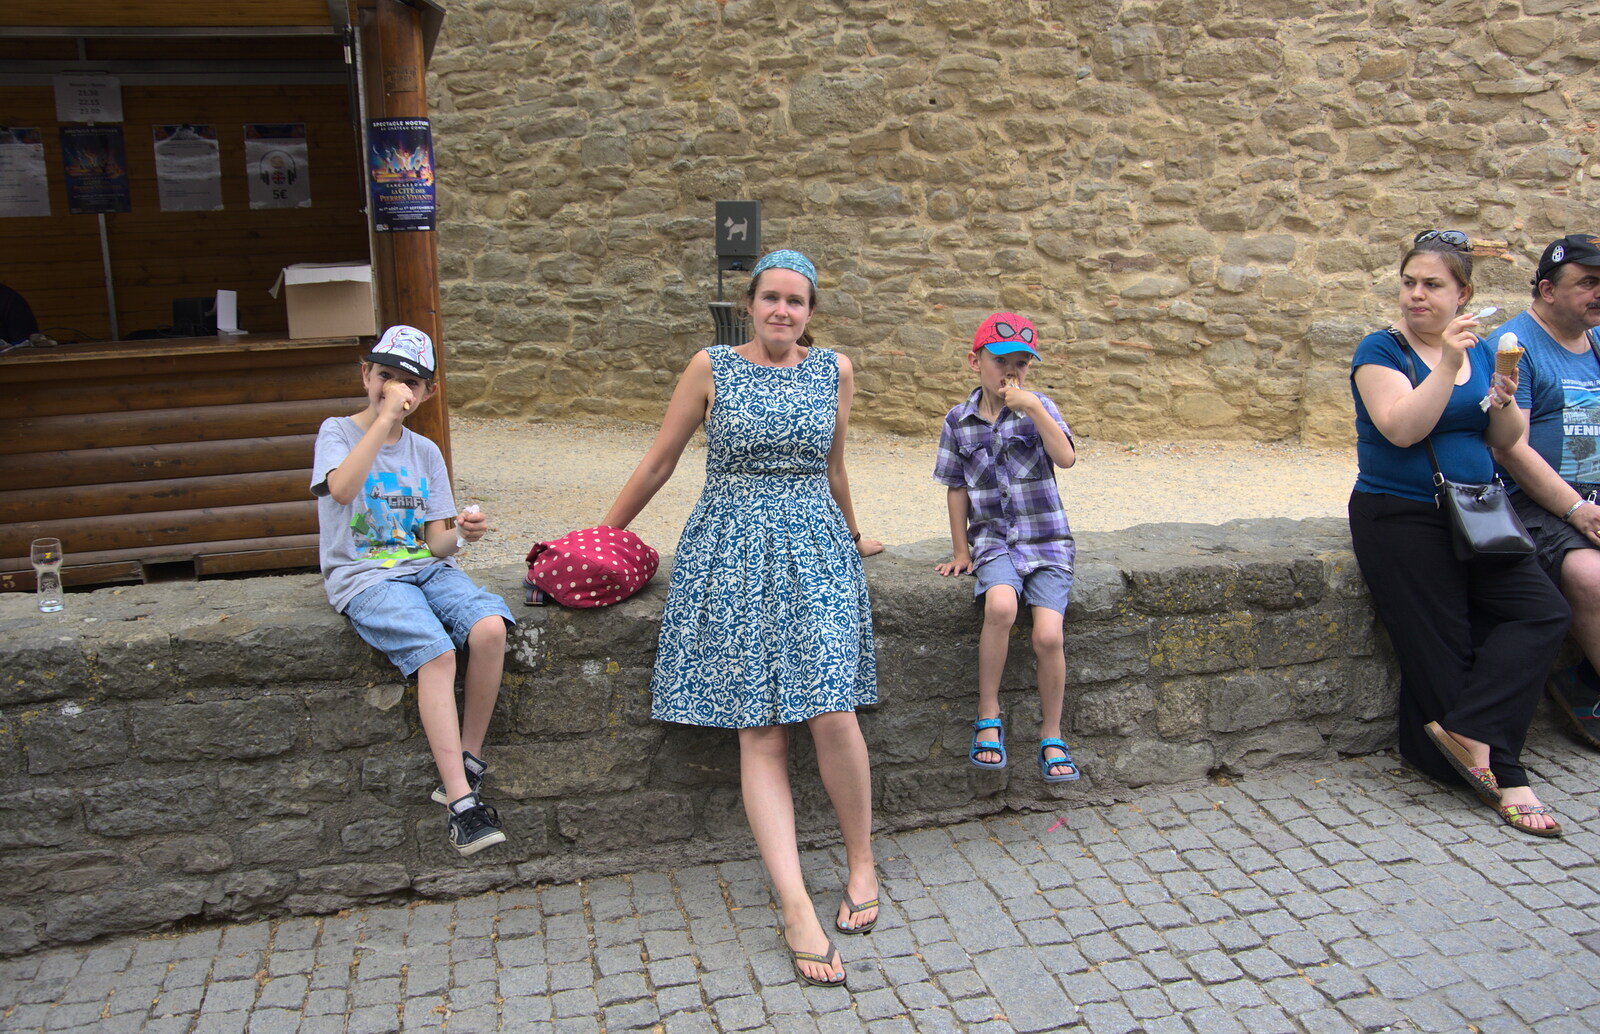 Fred, Isobel and Harry from A Trip to Carcassonne, Aude, France - 8th August 2018